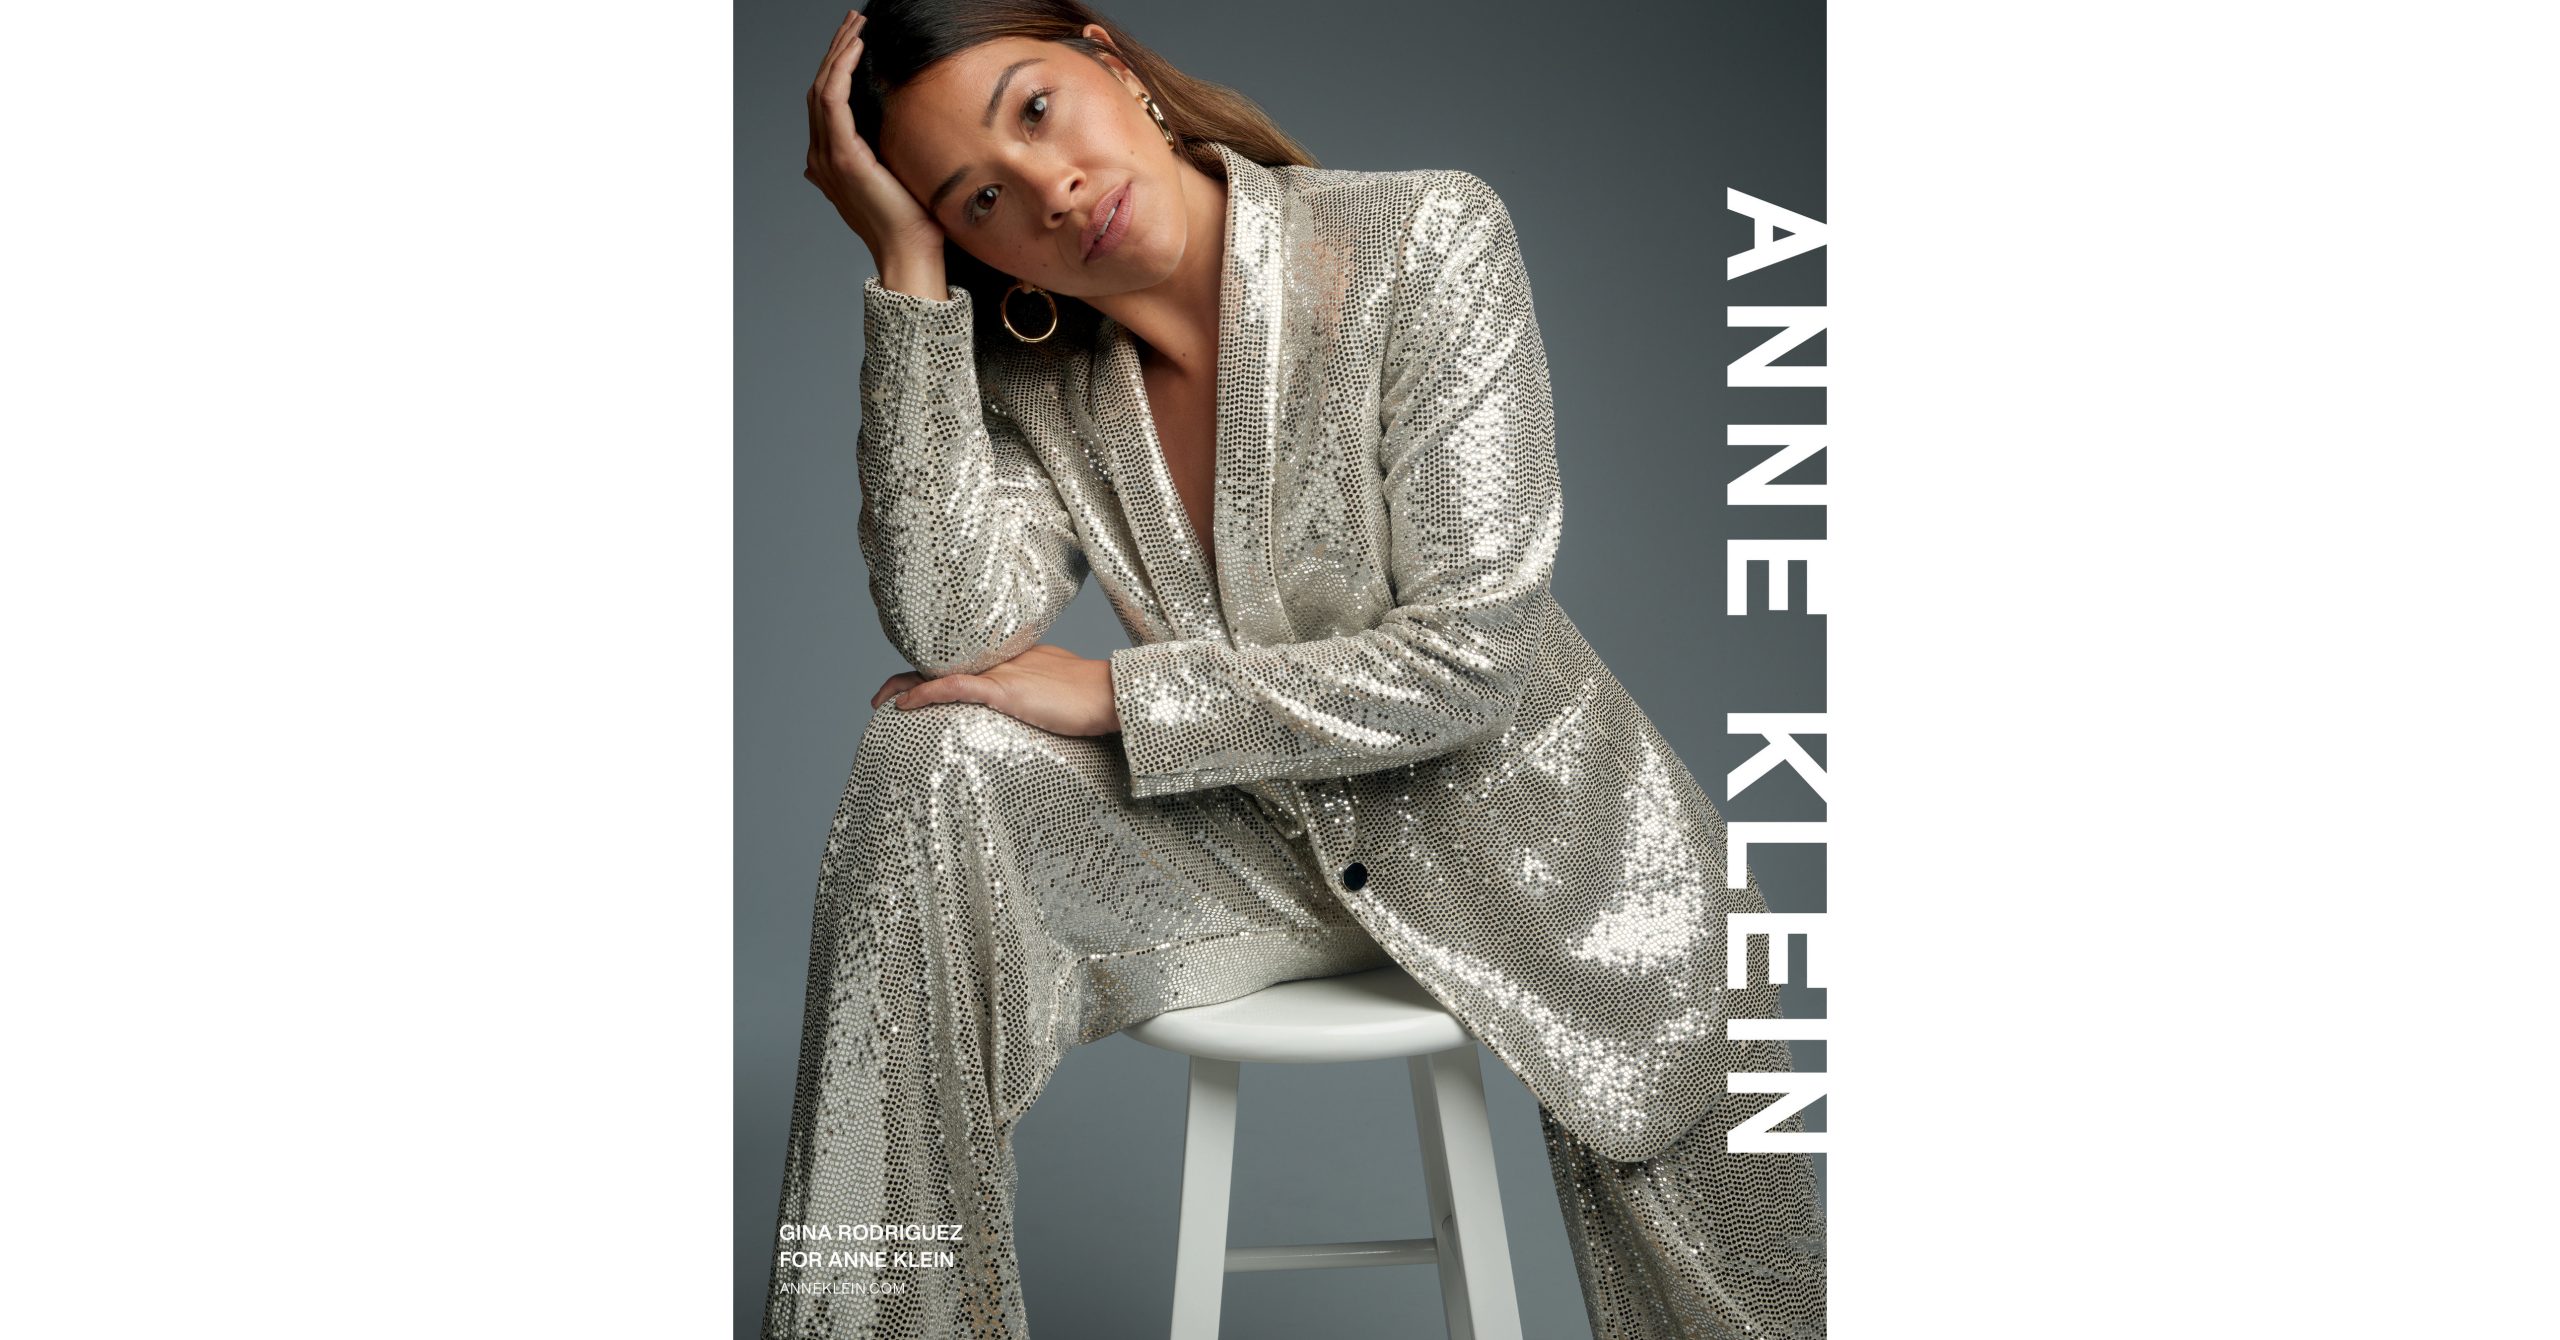 Gina Rodriguez for Anne Klein - The 1 and only - Best Brand Ambassadors -  Celebrity Group